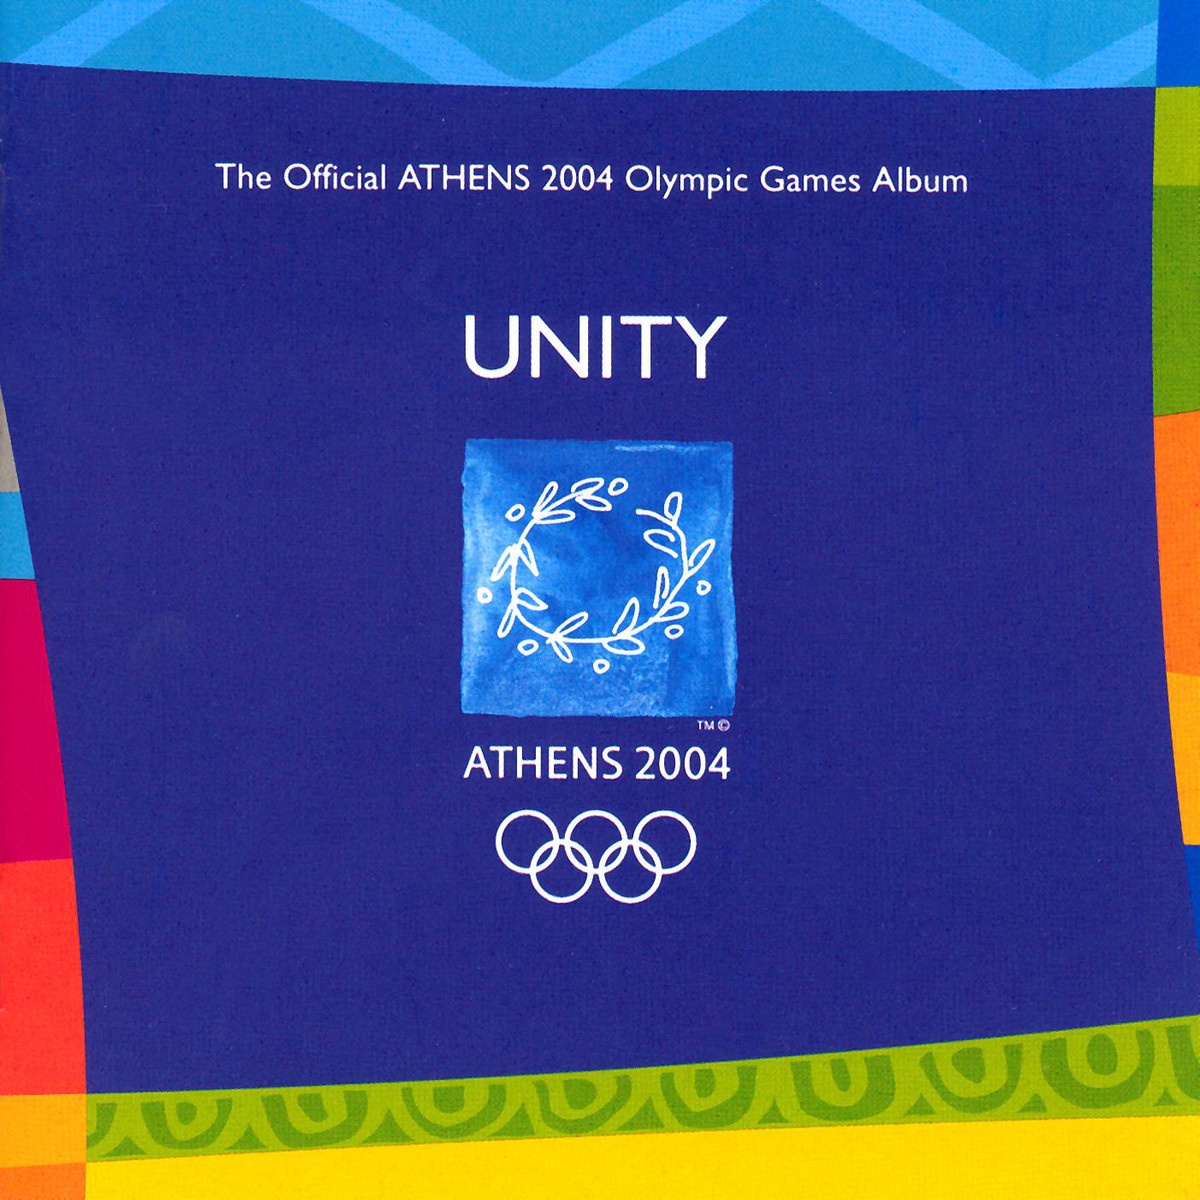 Unity - The Official ATHENS 2004 Olympic Games Album